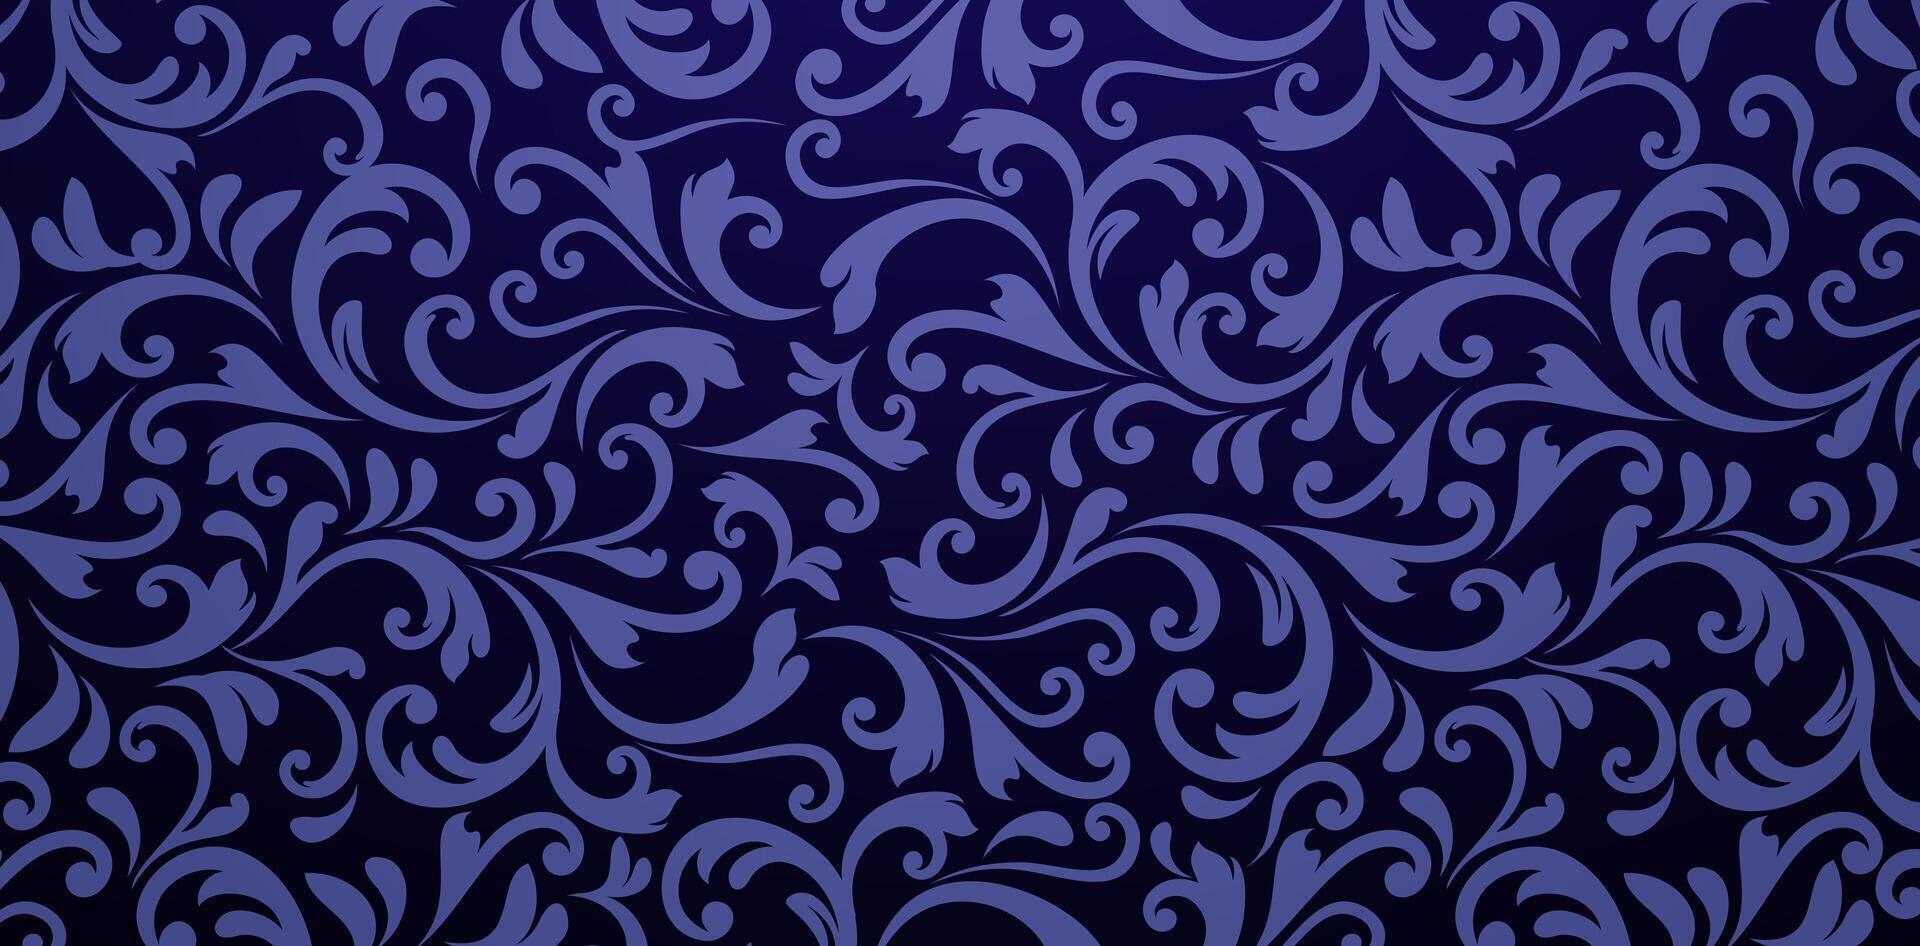 dark blue colors damask seamless pattern elements. Elegant luxury texture for wallpapers, backgrounds and pages fill, Fashionable modern wallpapers or textiles, books covers prints, Digital interfaces vector